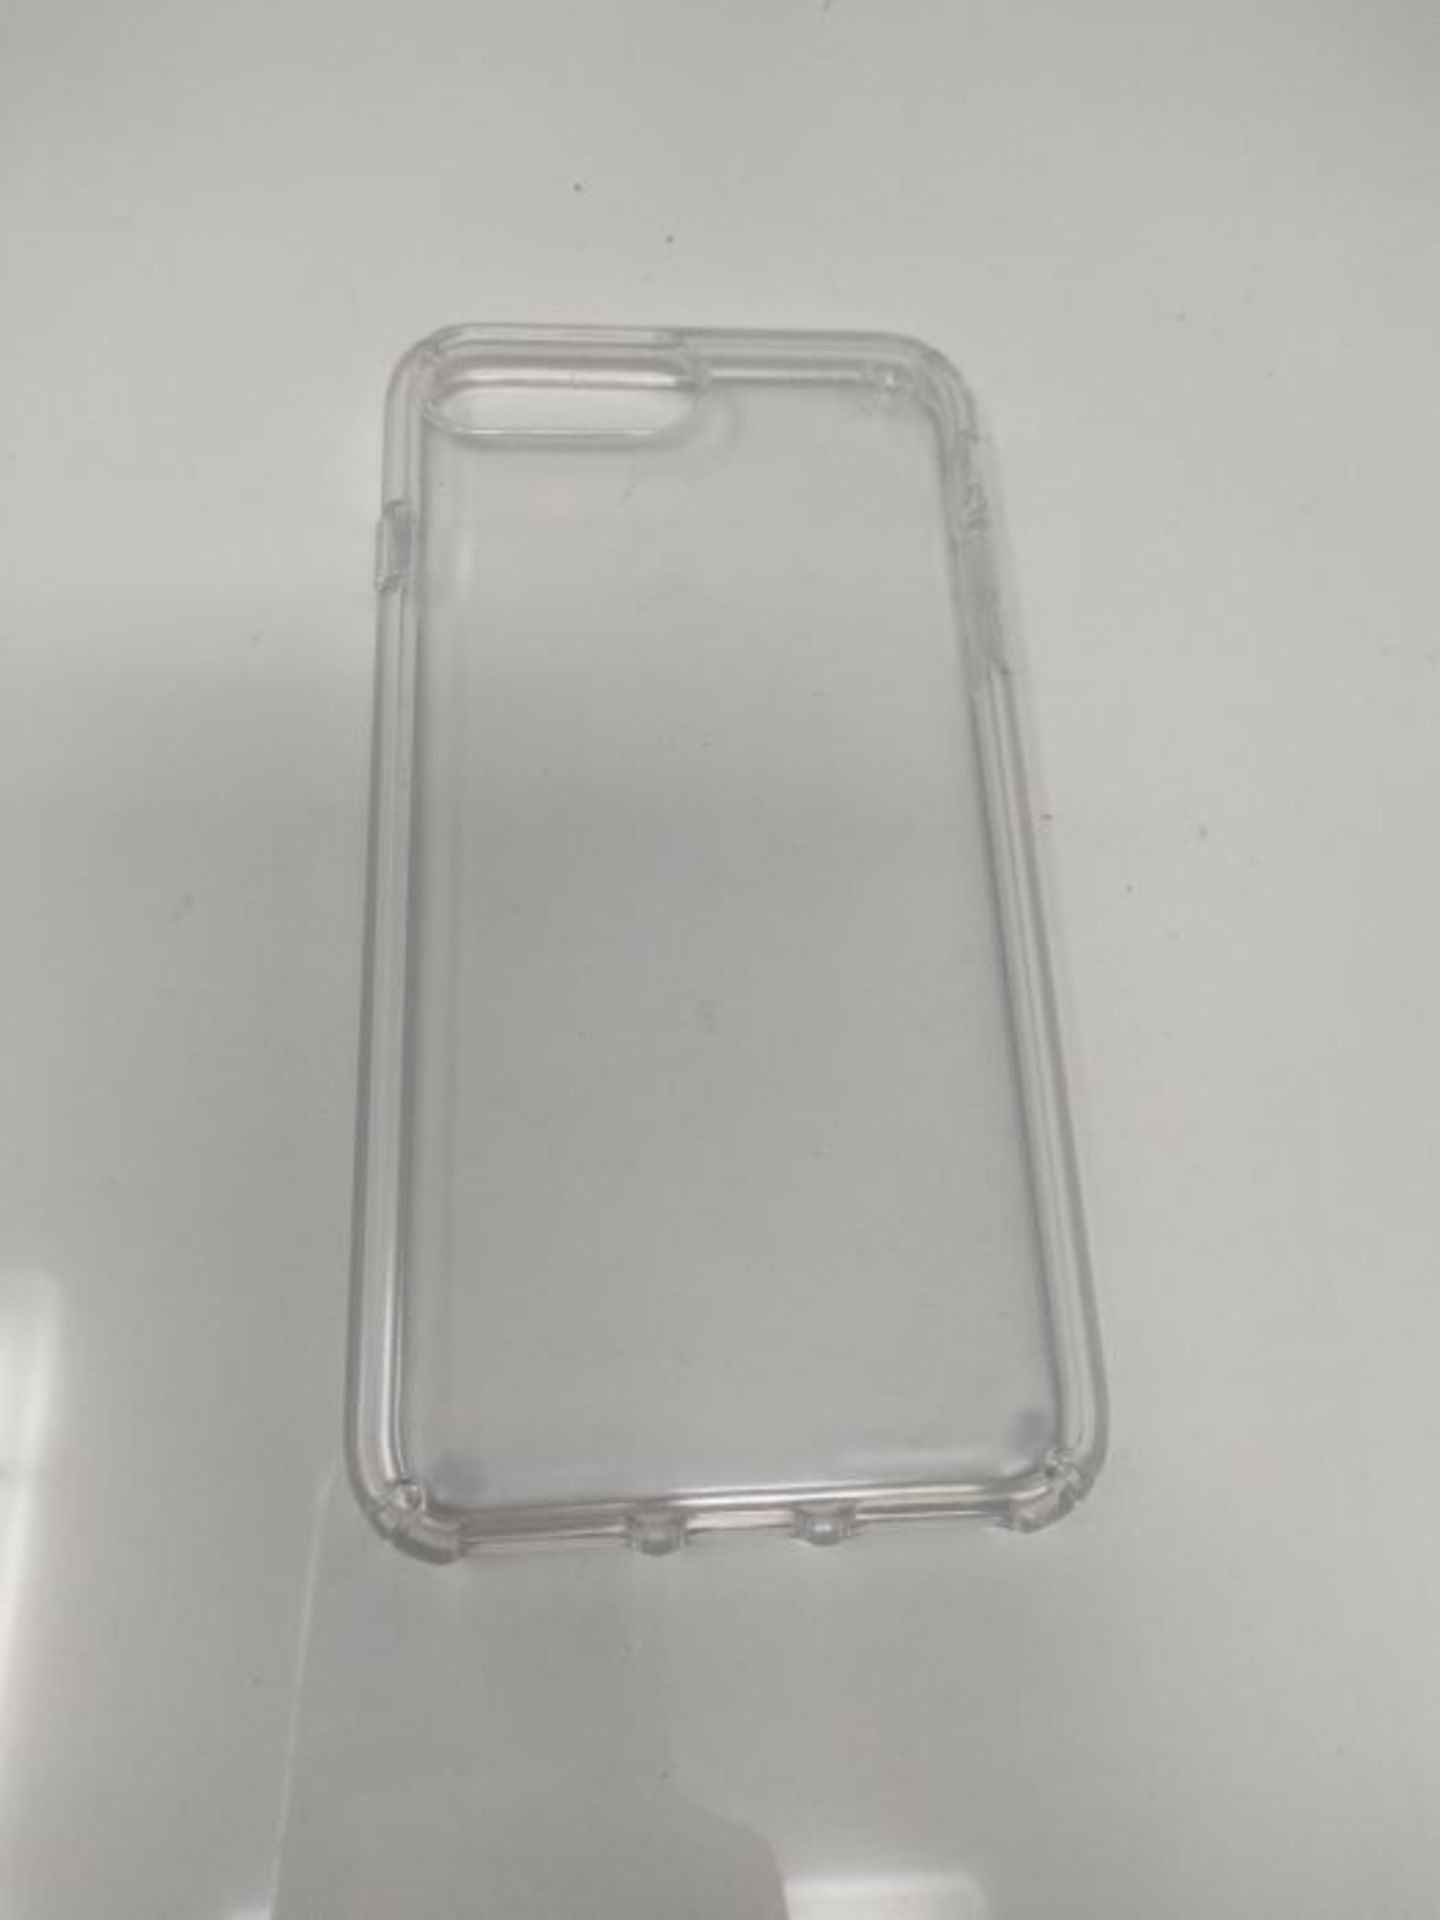 Speck iPhone 8 Plus Protective Ultra Thin Slim Hard Anti Scratch Presidio Clear Cover - Image 3 of 3